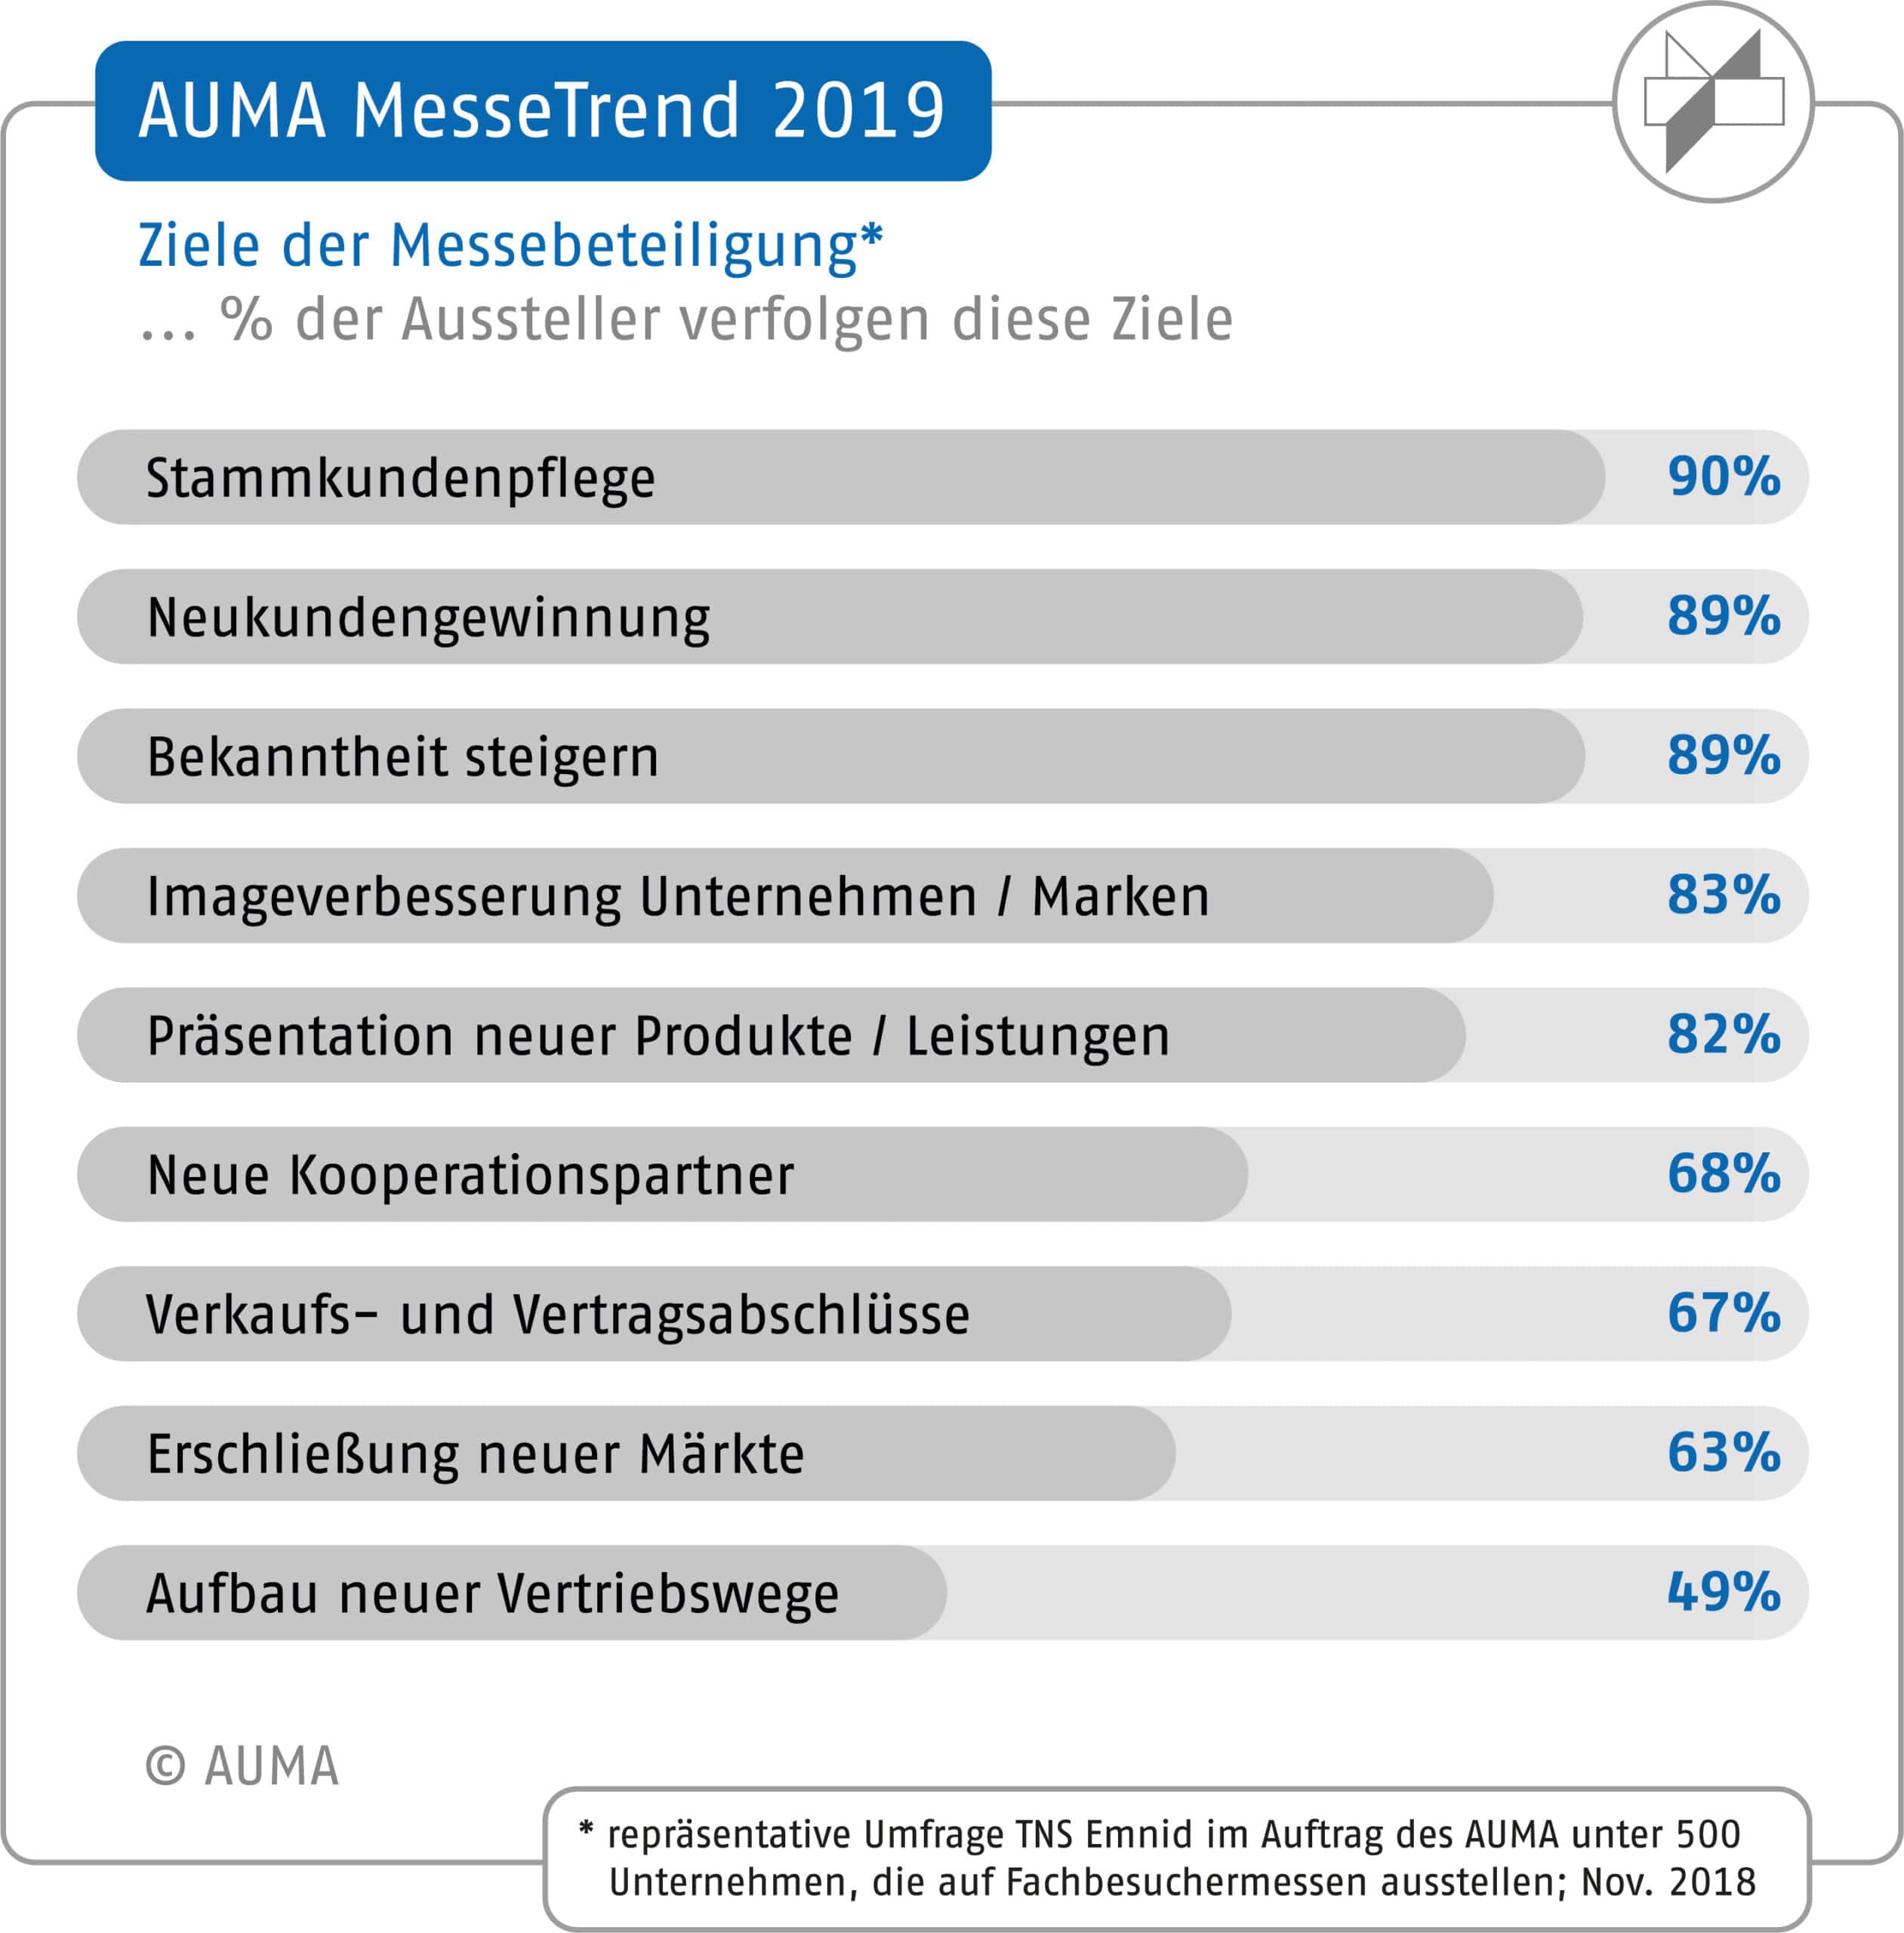 Messe-Trends 2019